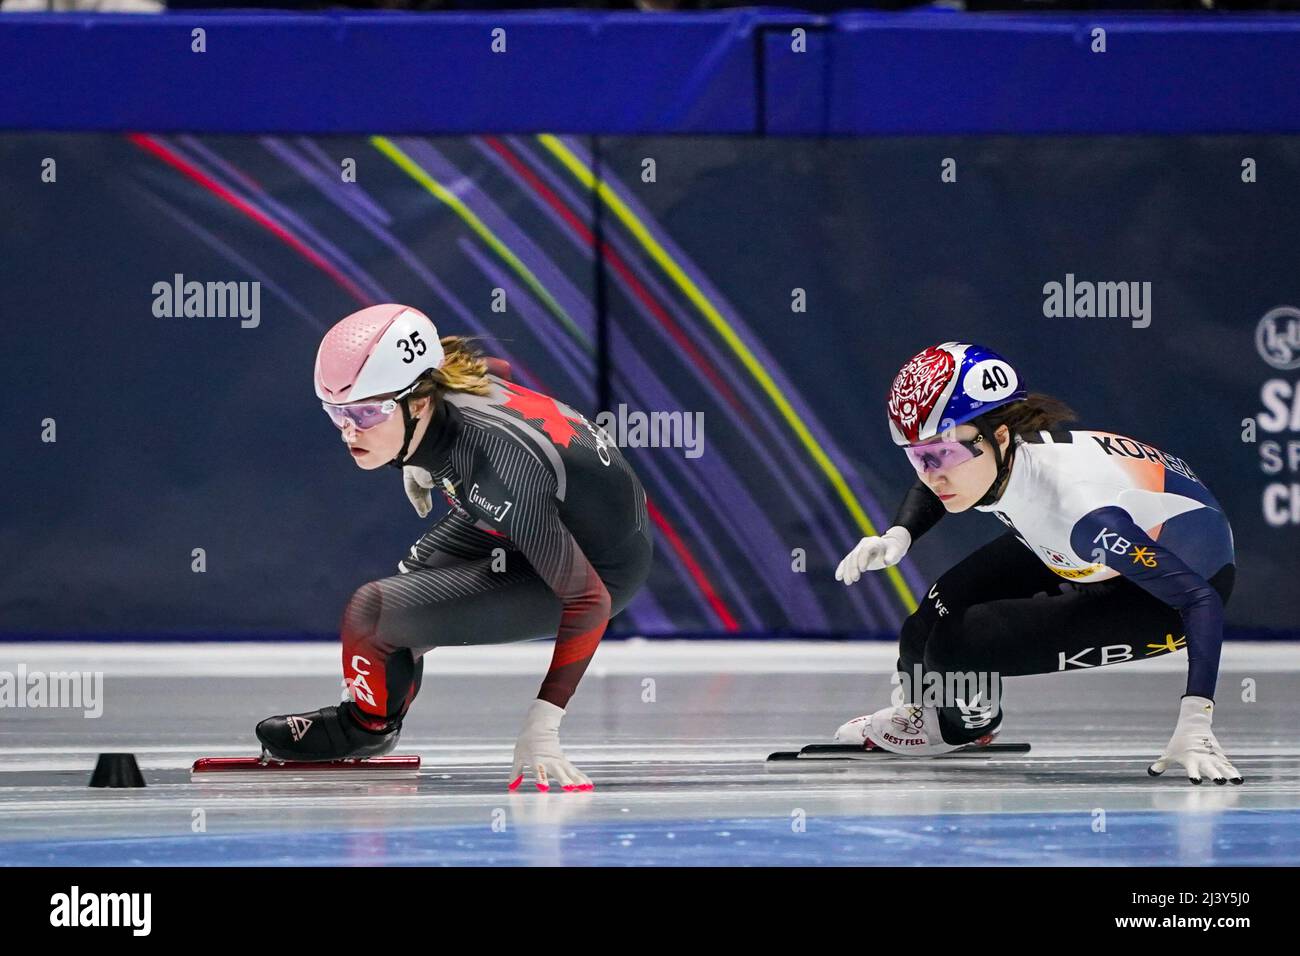 MONTREAL, CANADA - APRIL 10: Kim Boutin of Canada and Minjeong Choi of the  Republic of Korea during Day 3 of the ISU World Short Track Championships  at the Maurice Richard Arena